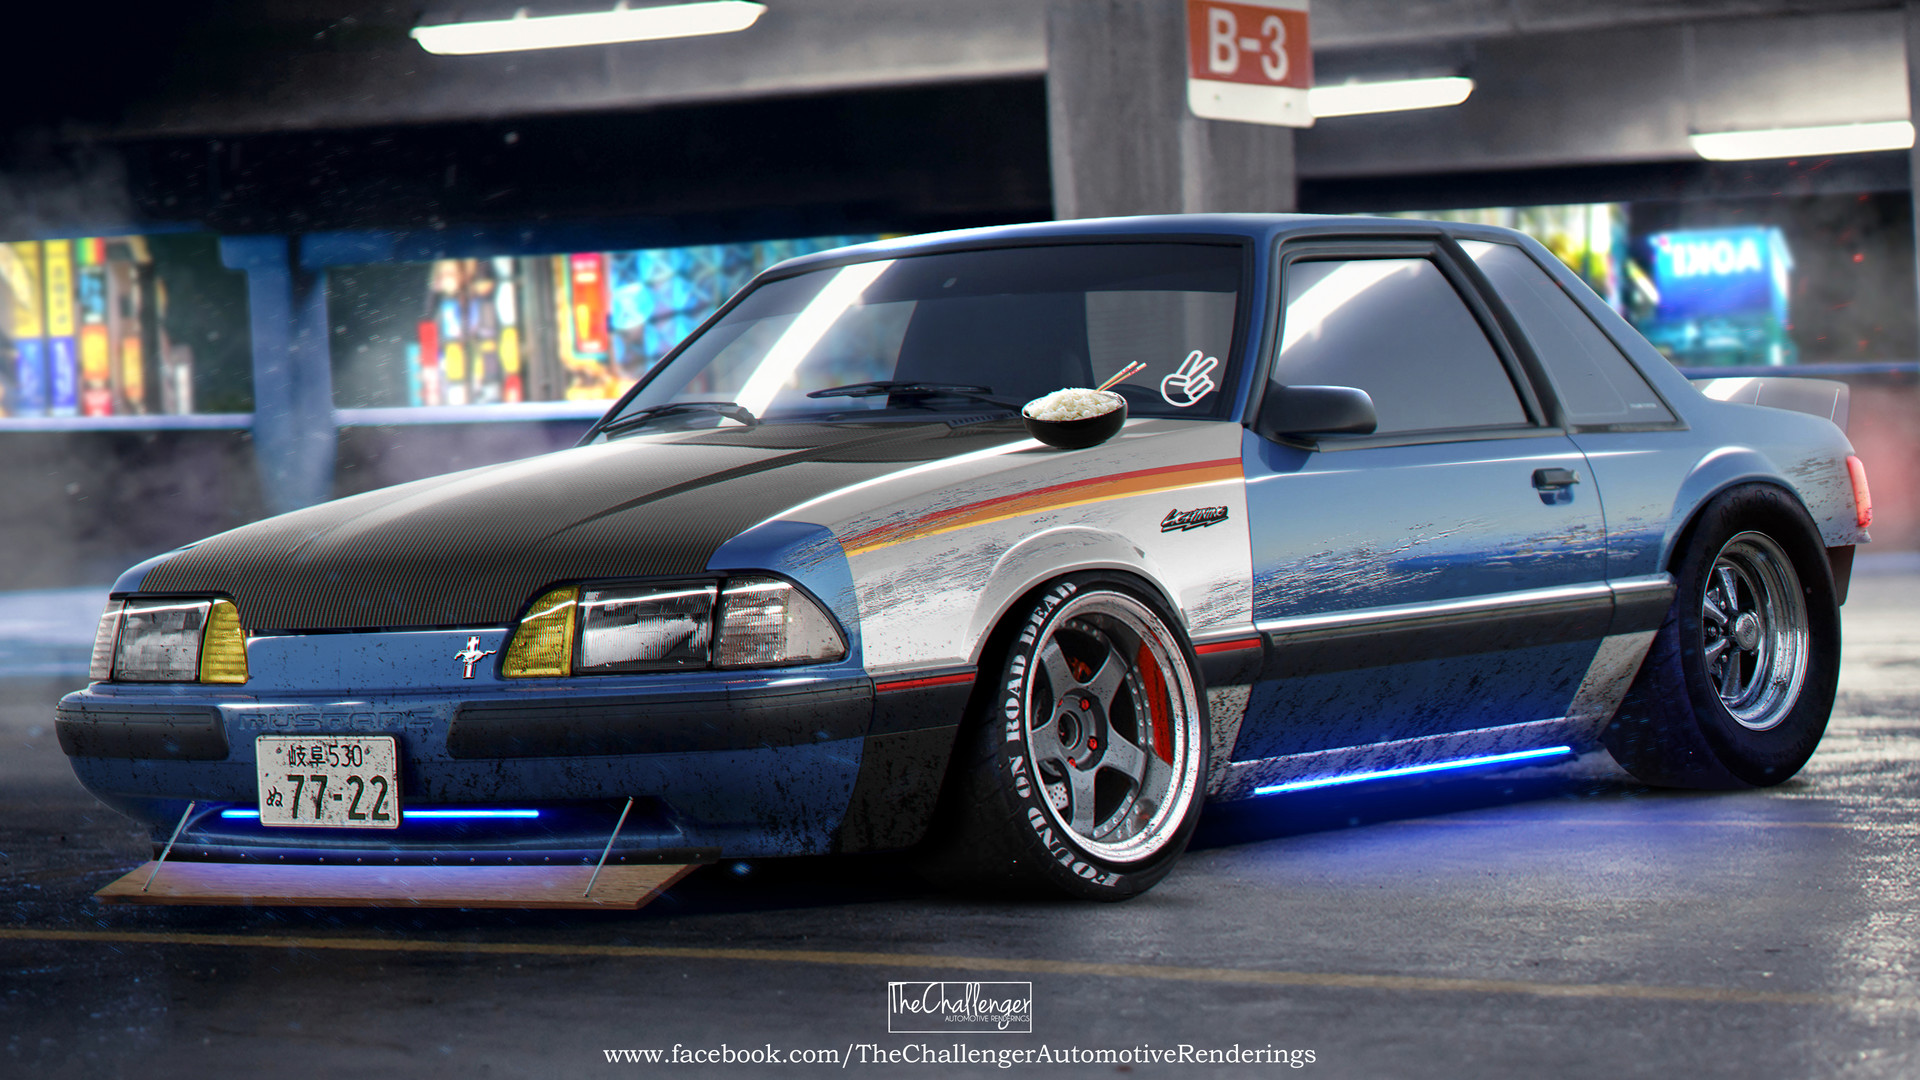 Ford Mustang Foxbody, Abimelec Arellano